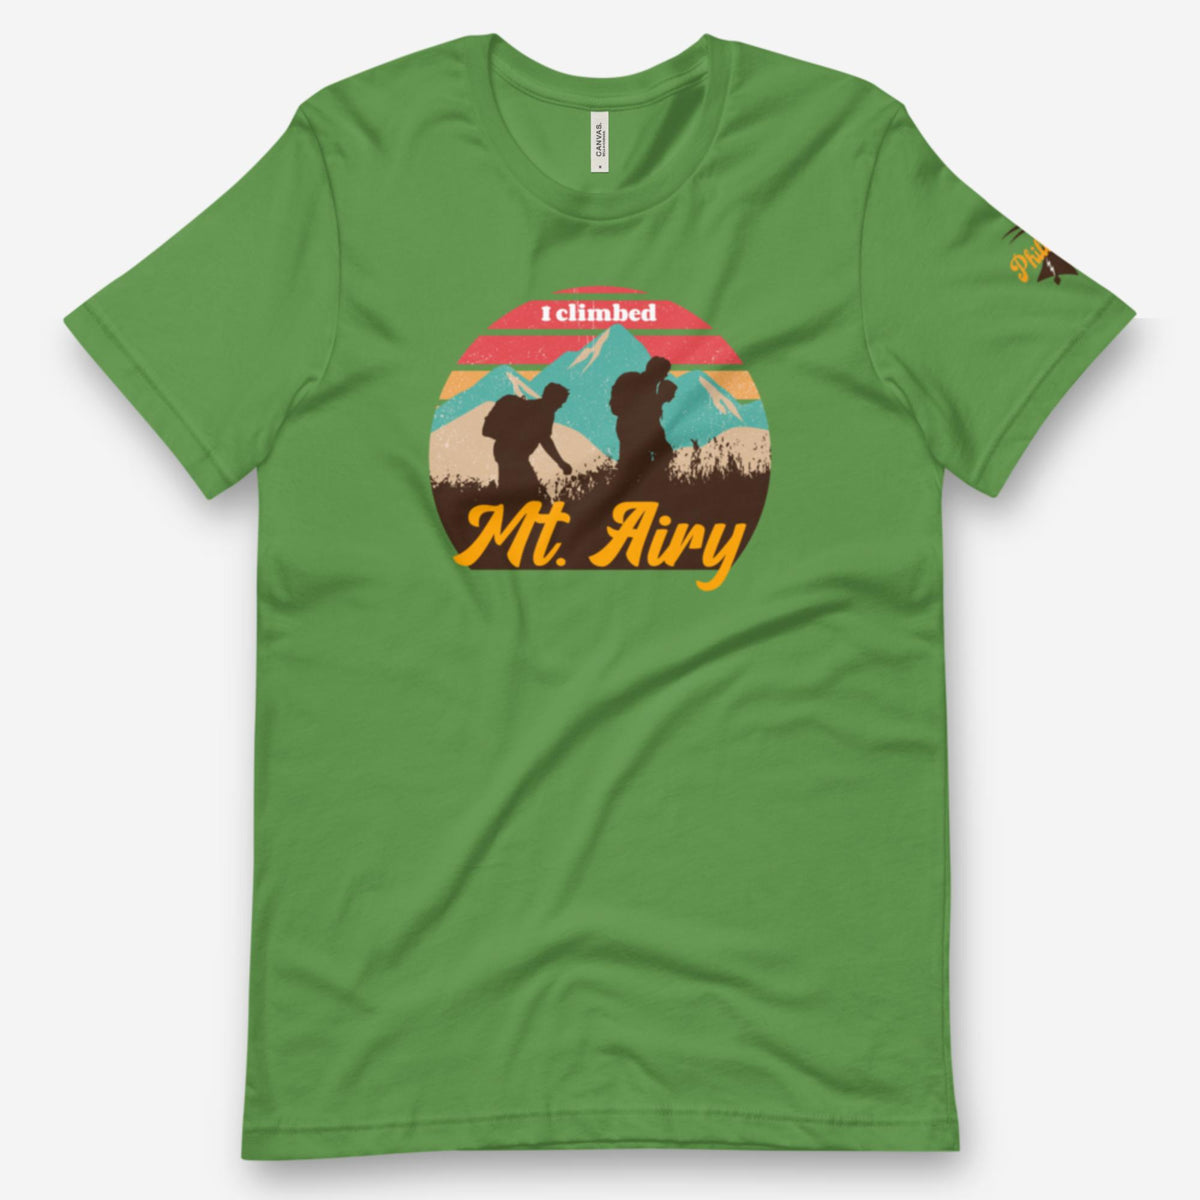 &quot;I Climbed Mt. Airy&quot; Tee